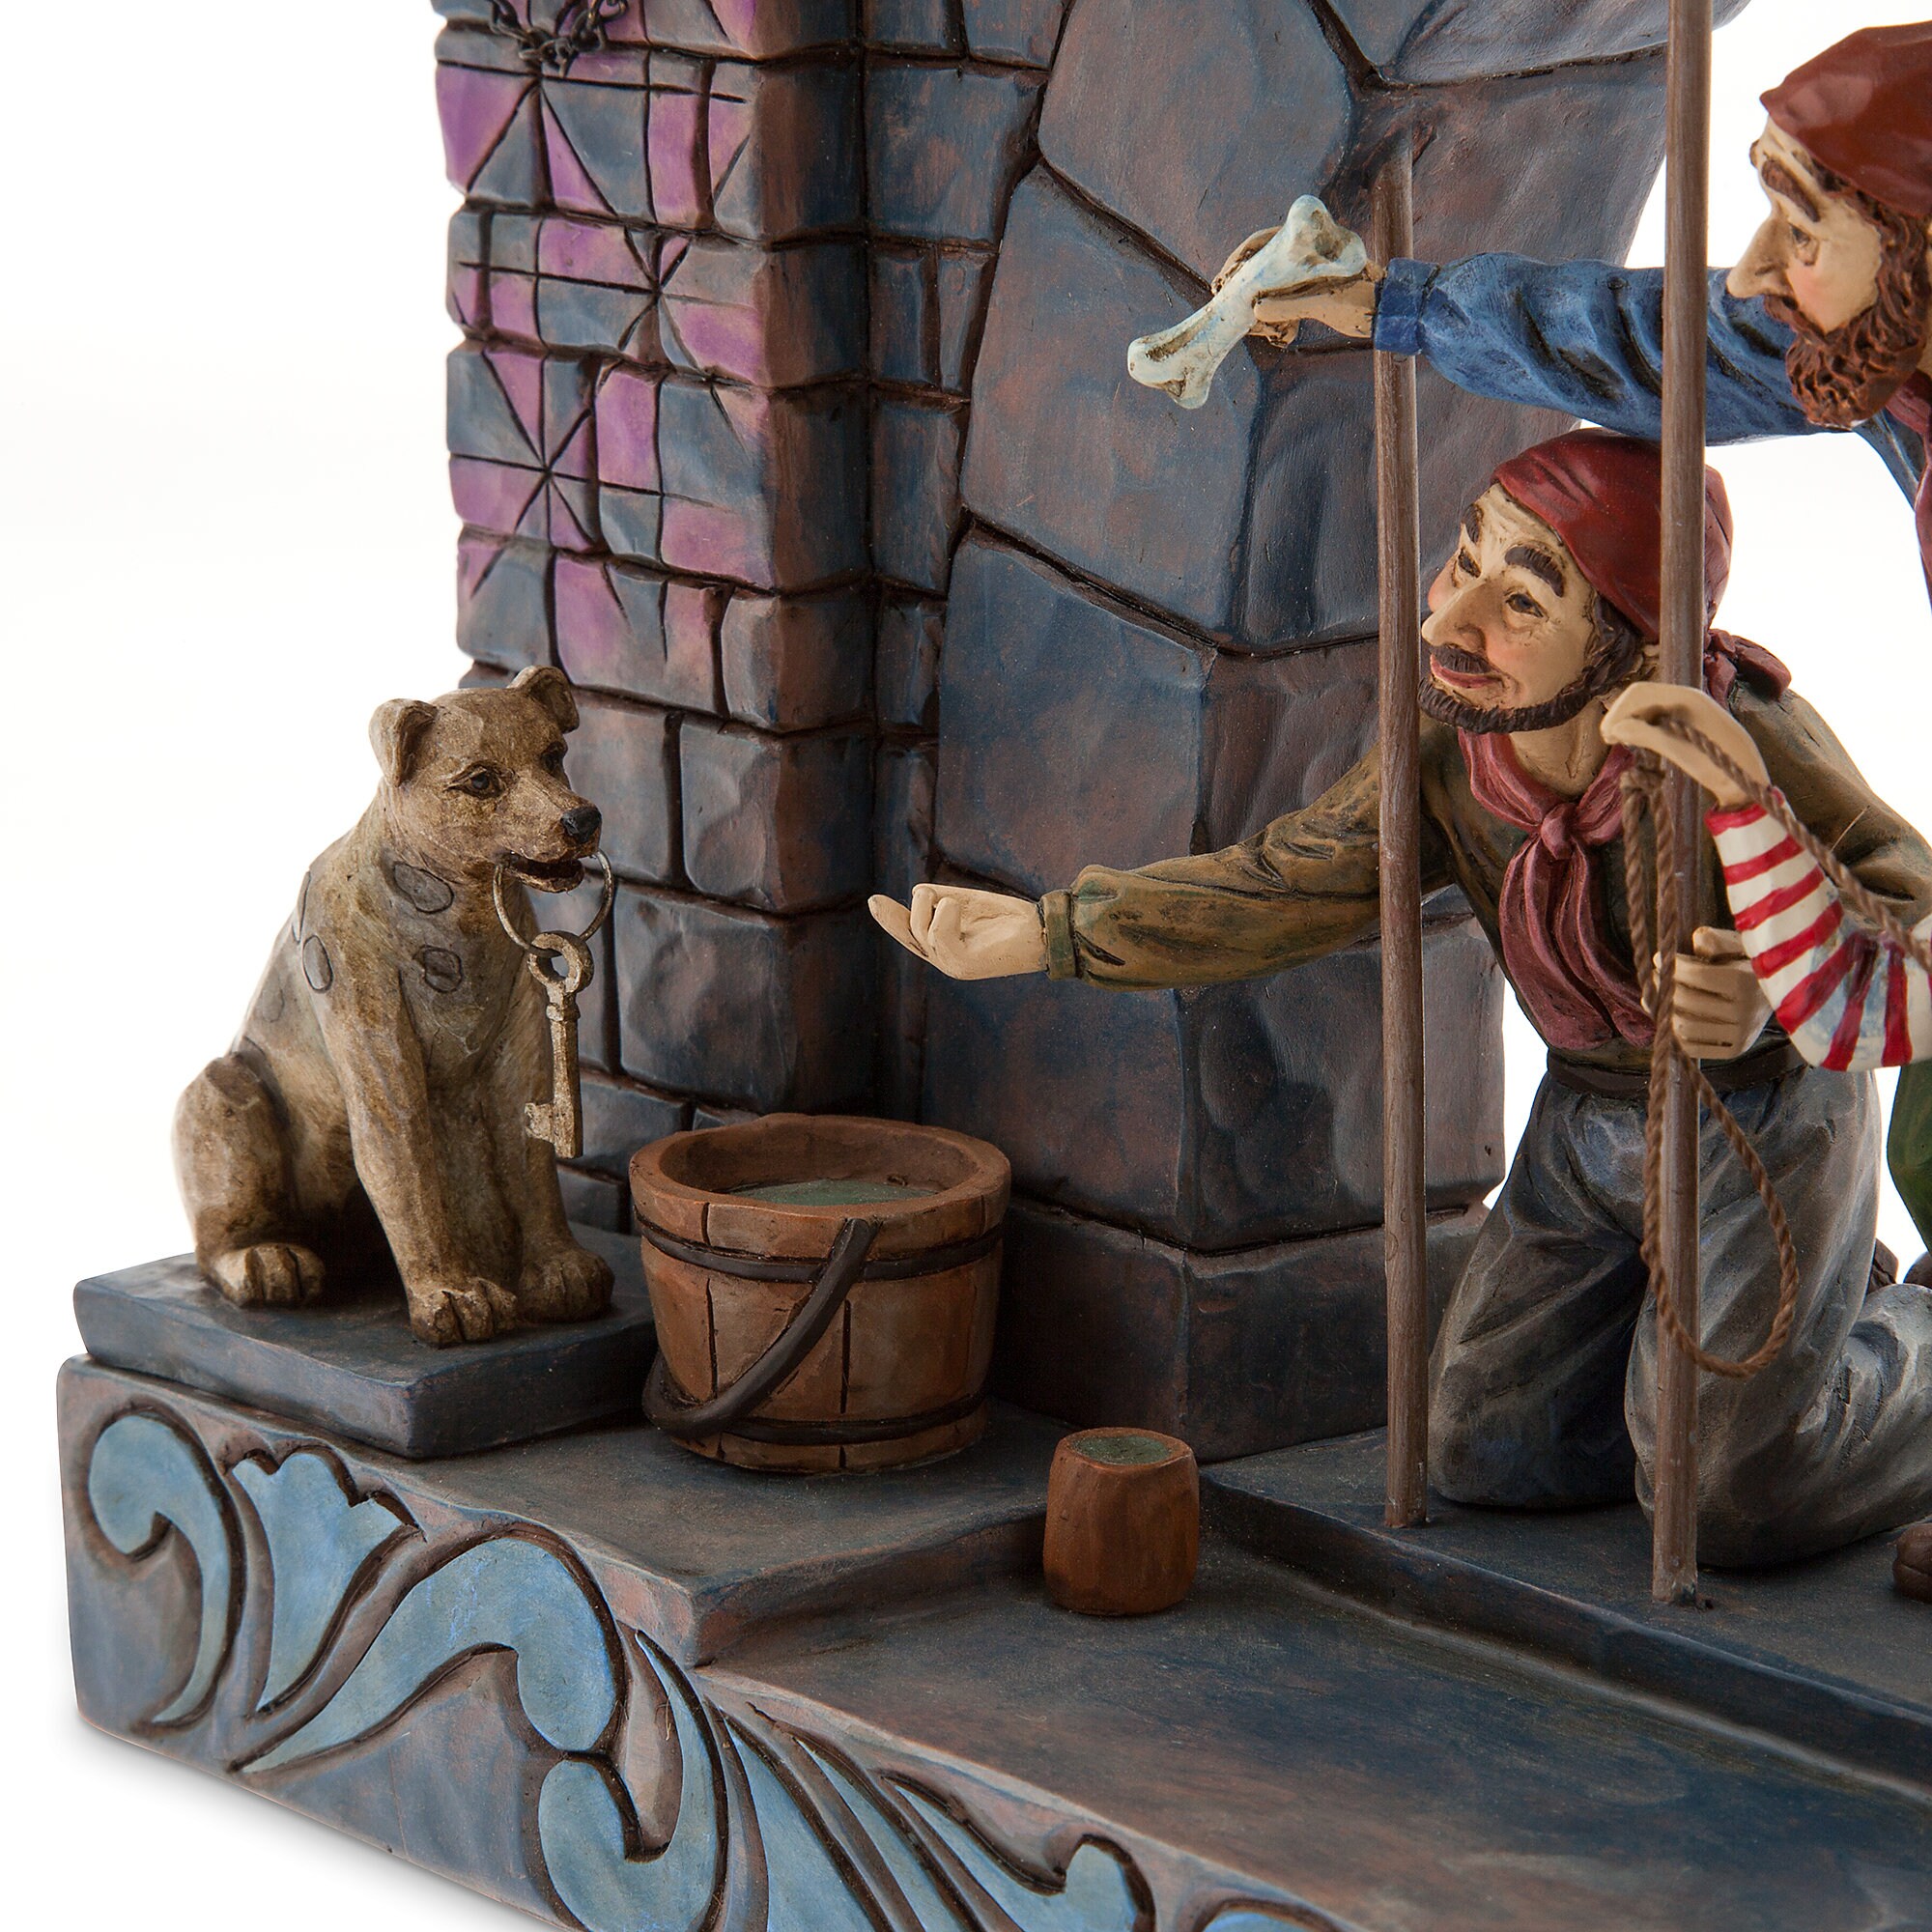 Pirates of the Caribbean ''Jail Scene'' Figure by Jim Shore